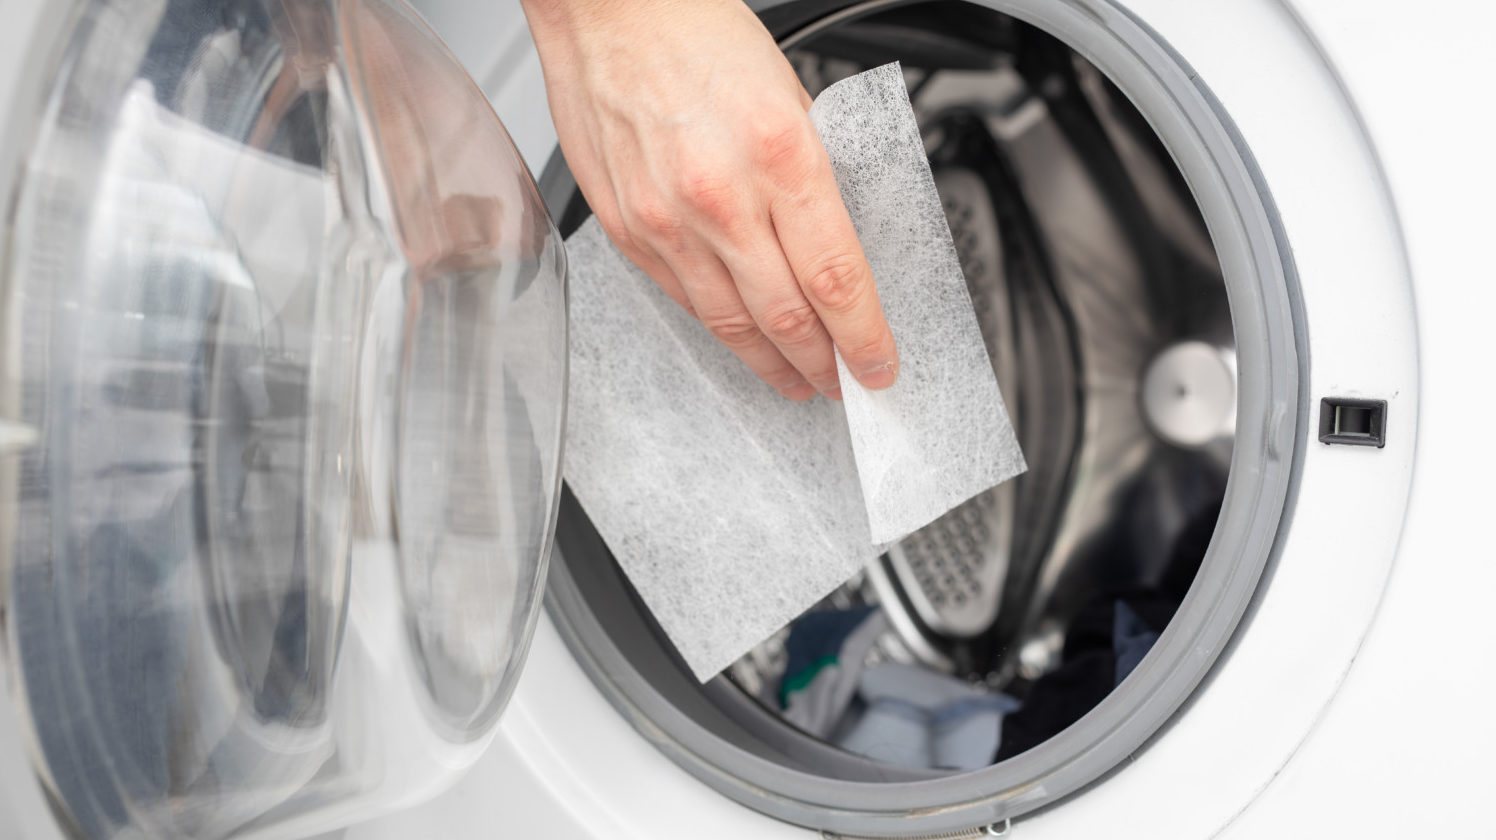 Dryer sheet alternatives: Why you may not want to toss in a dryer sheet  with your next load of laundry